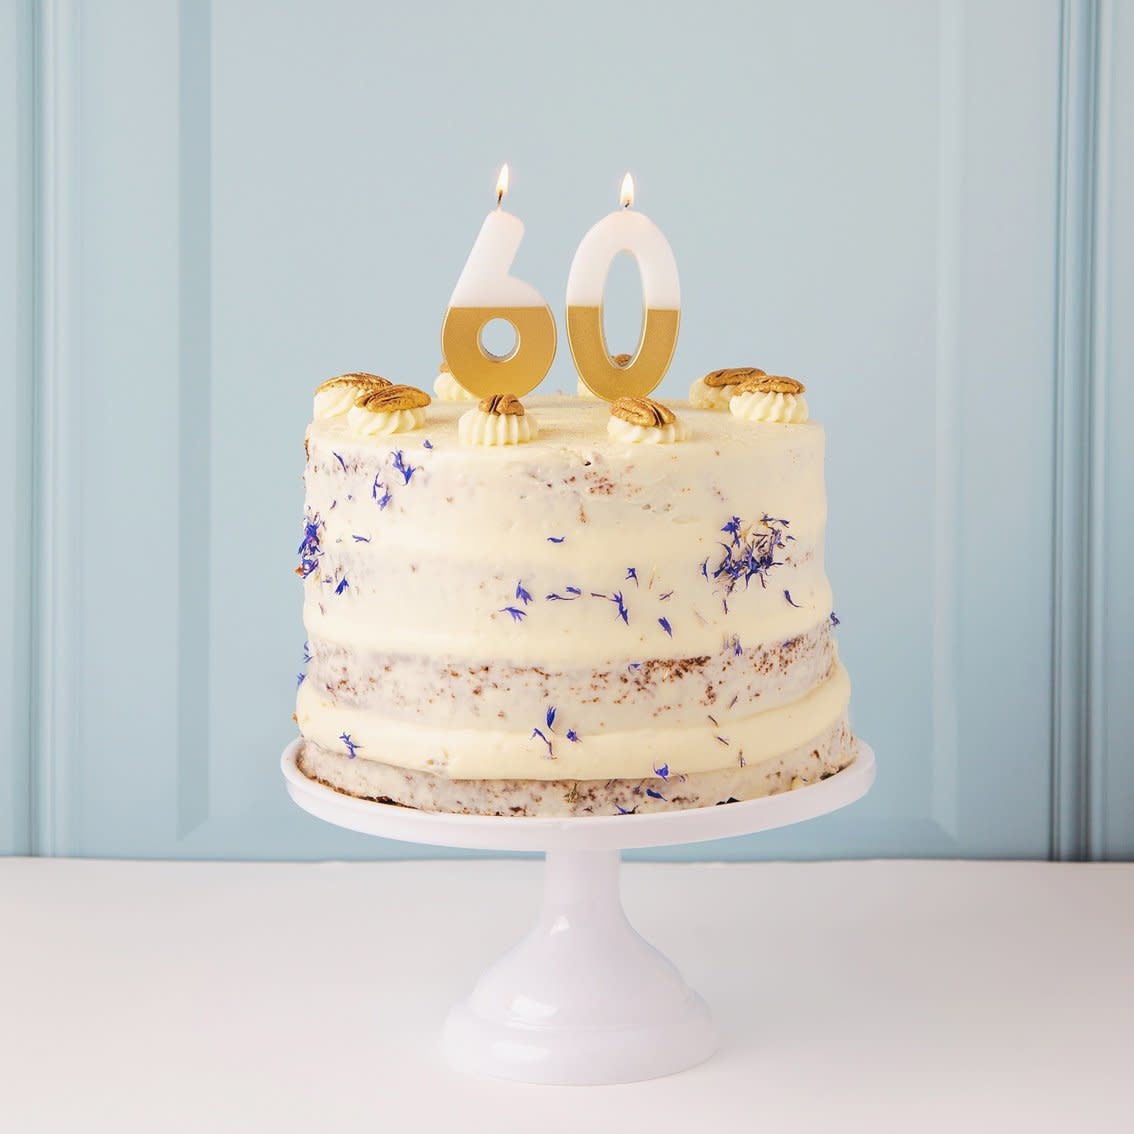 TT White and Gold Number 0 Candle